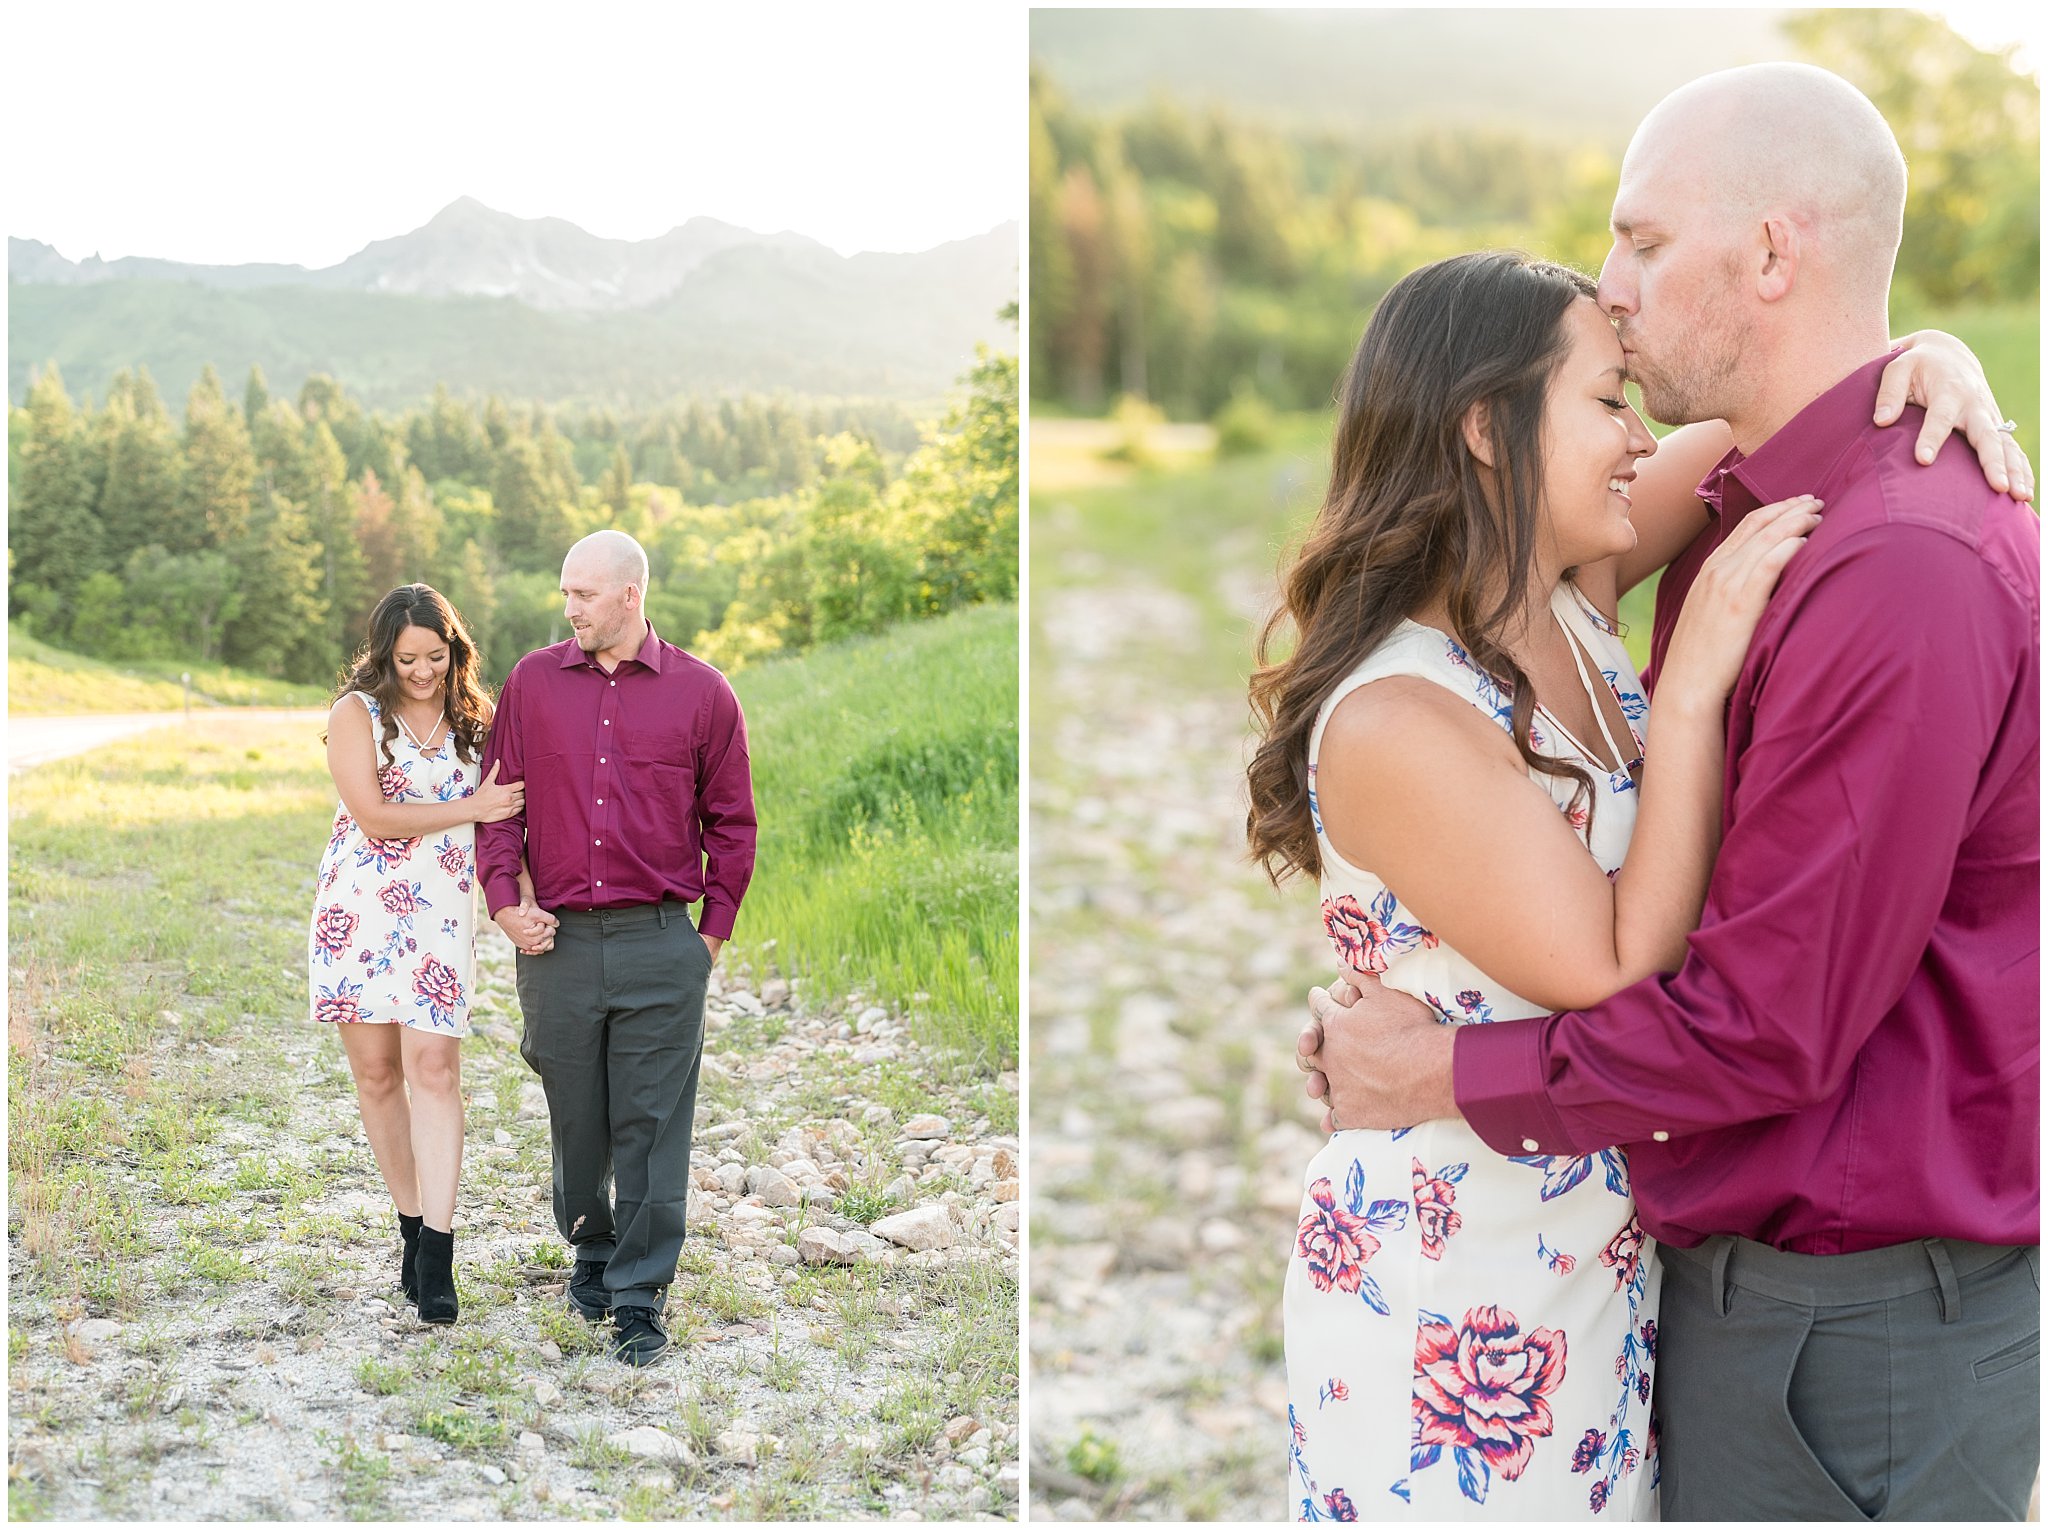 Candid engagement session with mountains in the background and wildflowers | Snowbasin Utah Engagements